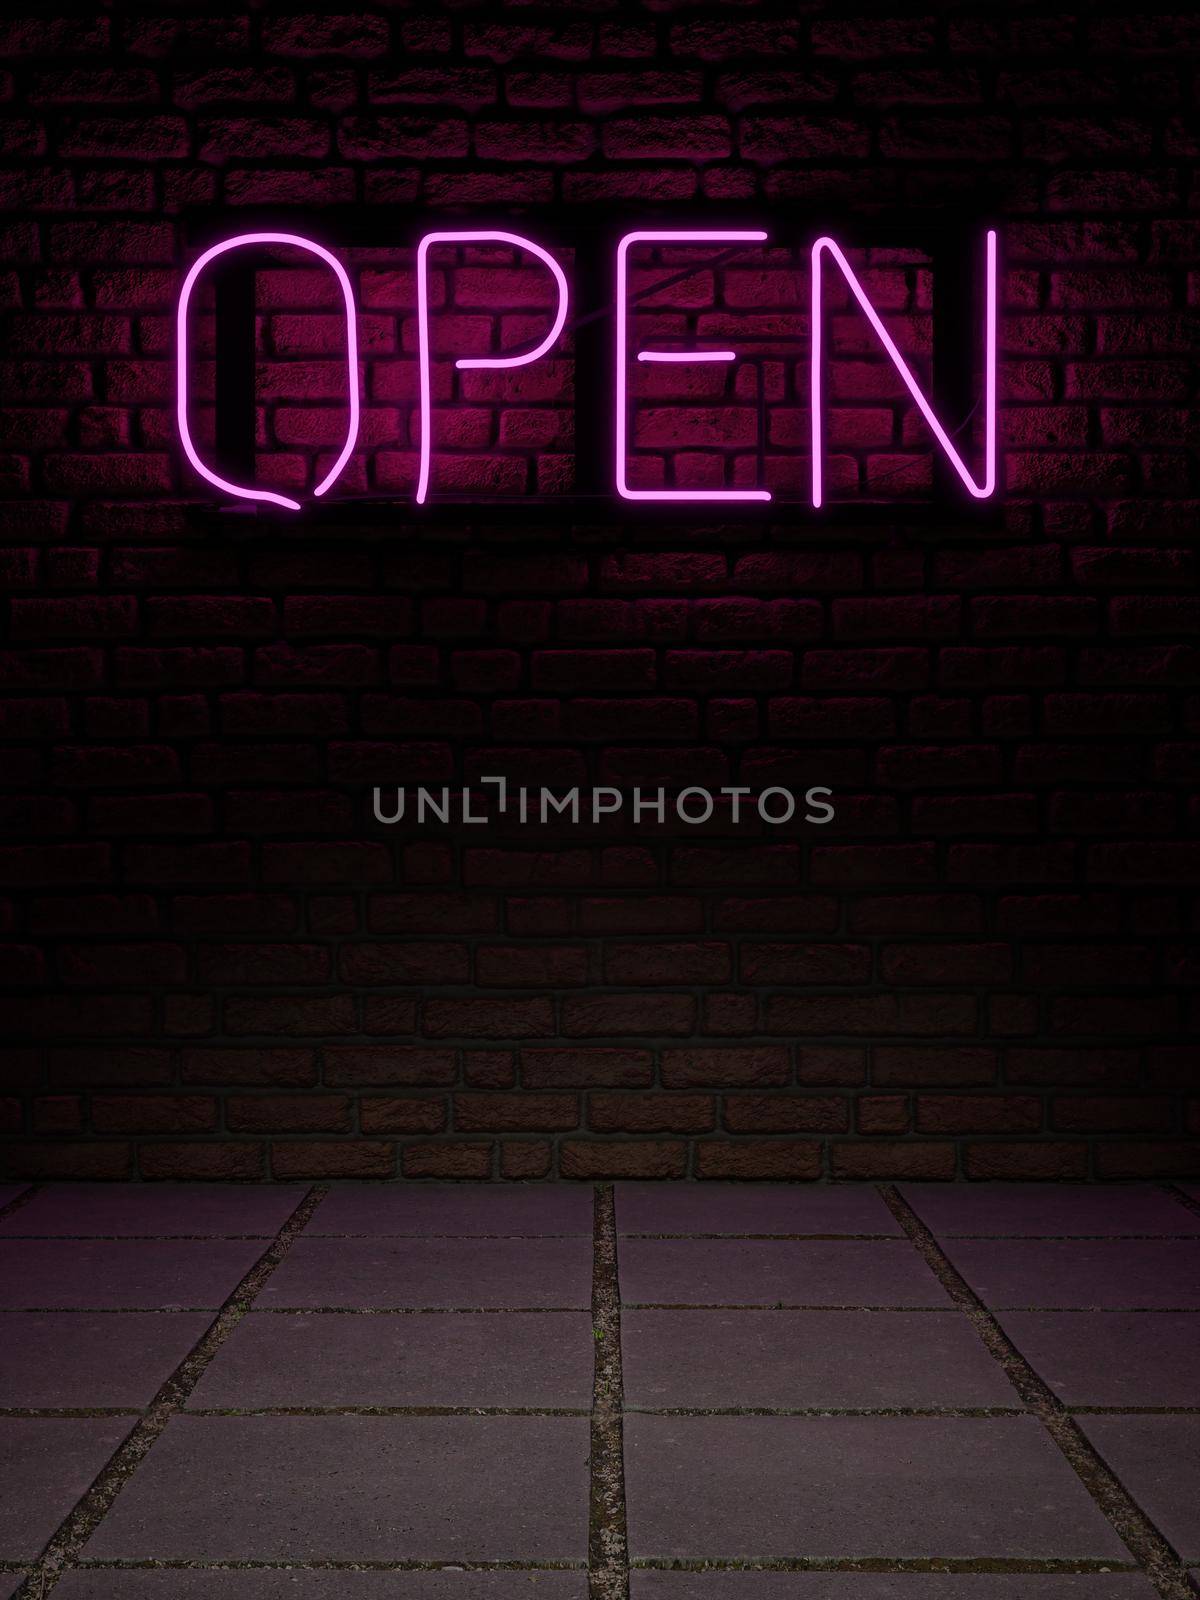 3d representation of a neon sign with the word "open" in pink light on a brick wall and gray slab floor